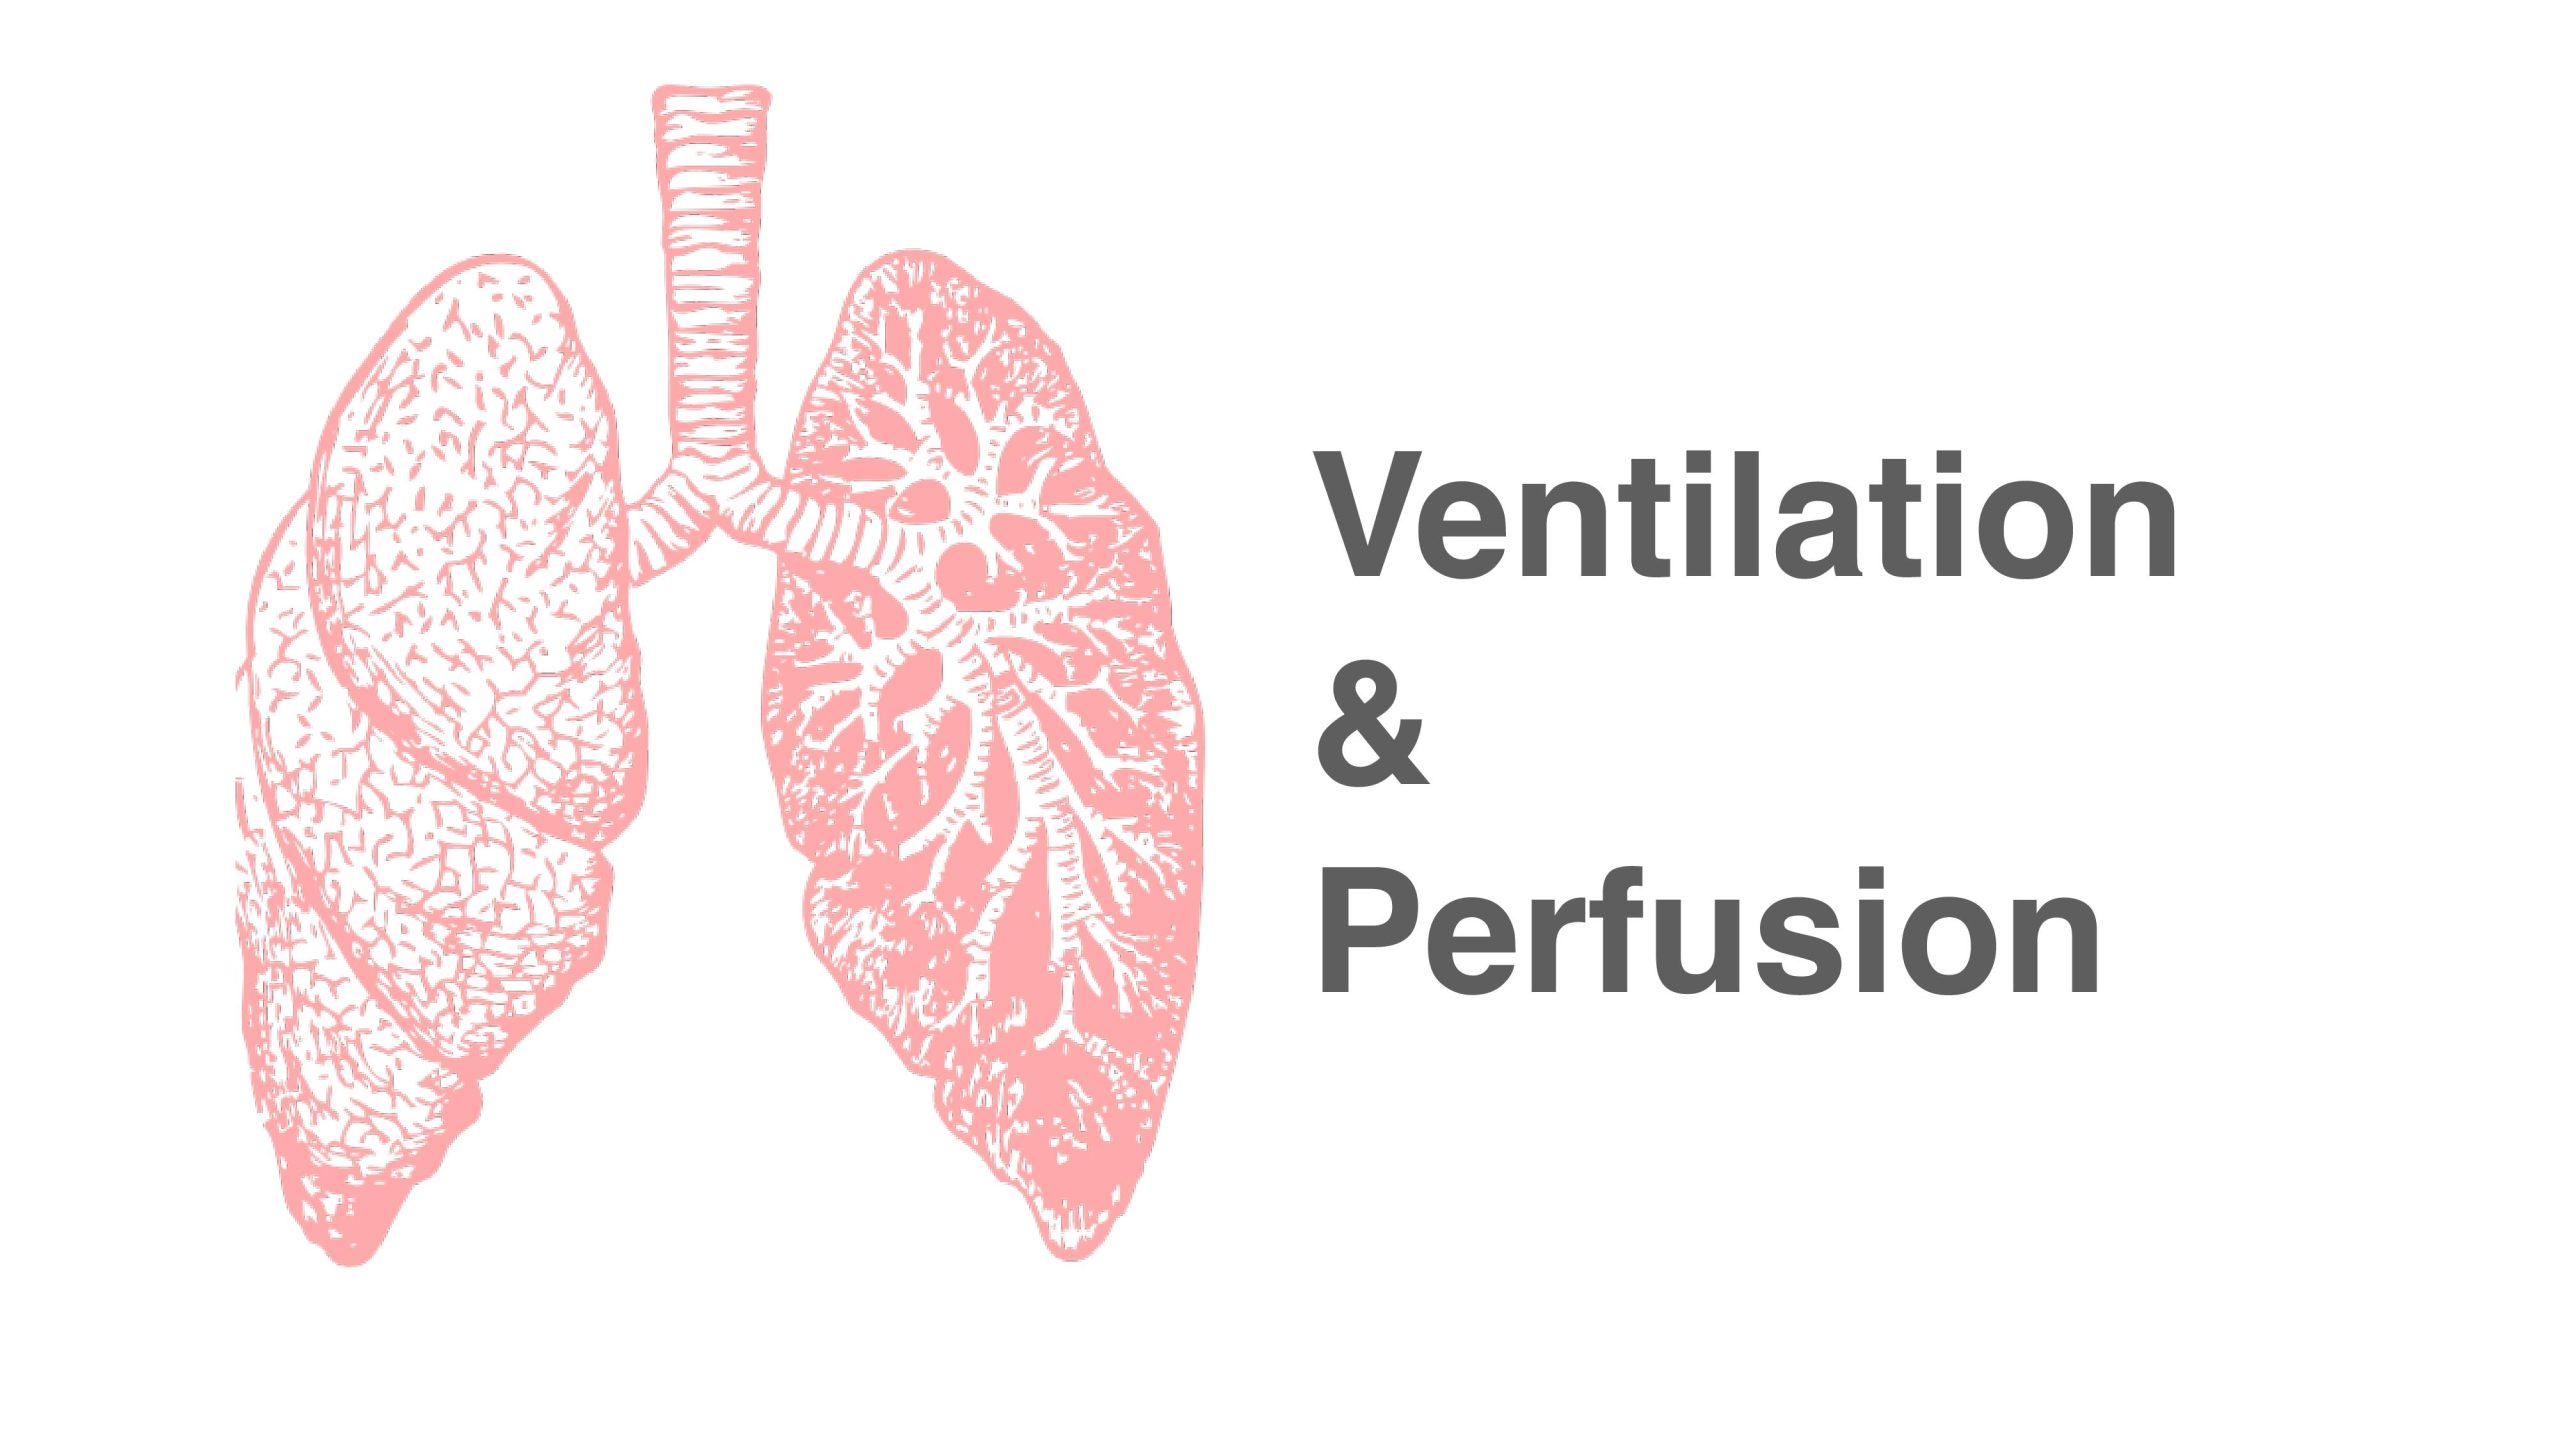 4. Ventilation and Perfusion